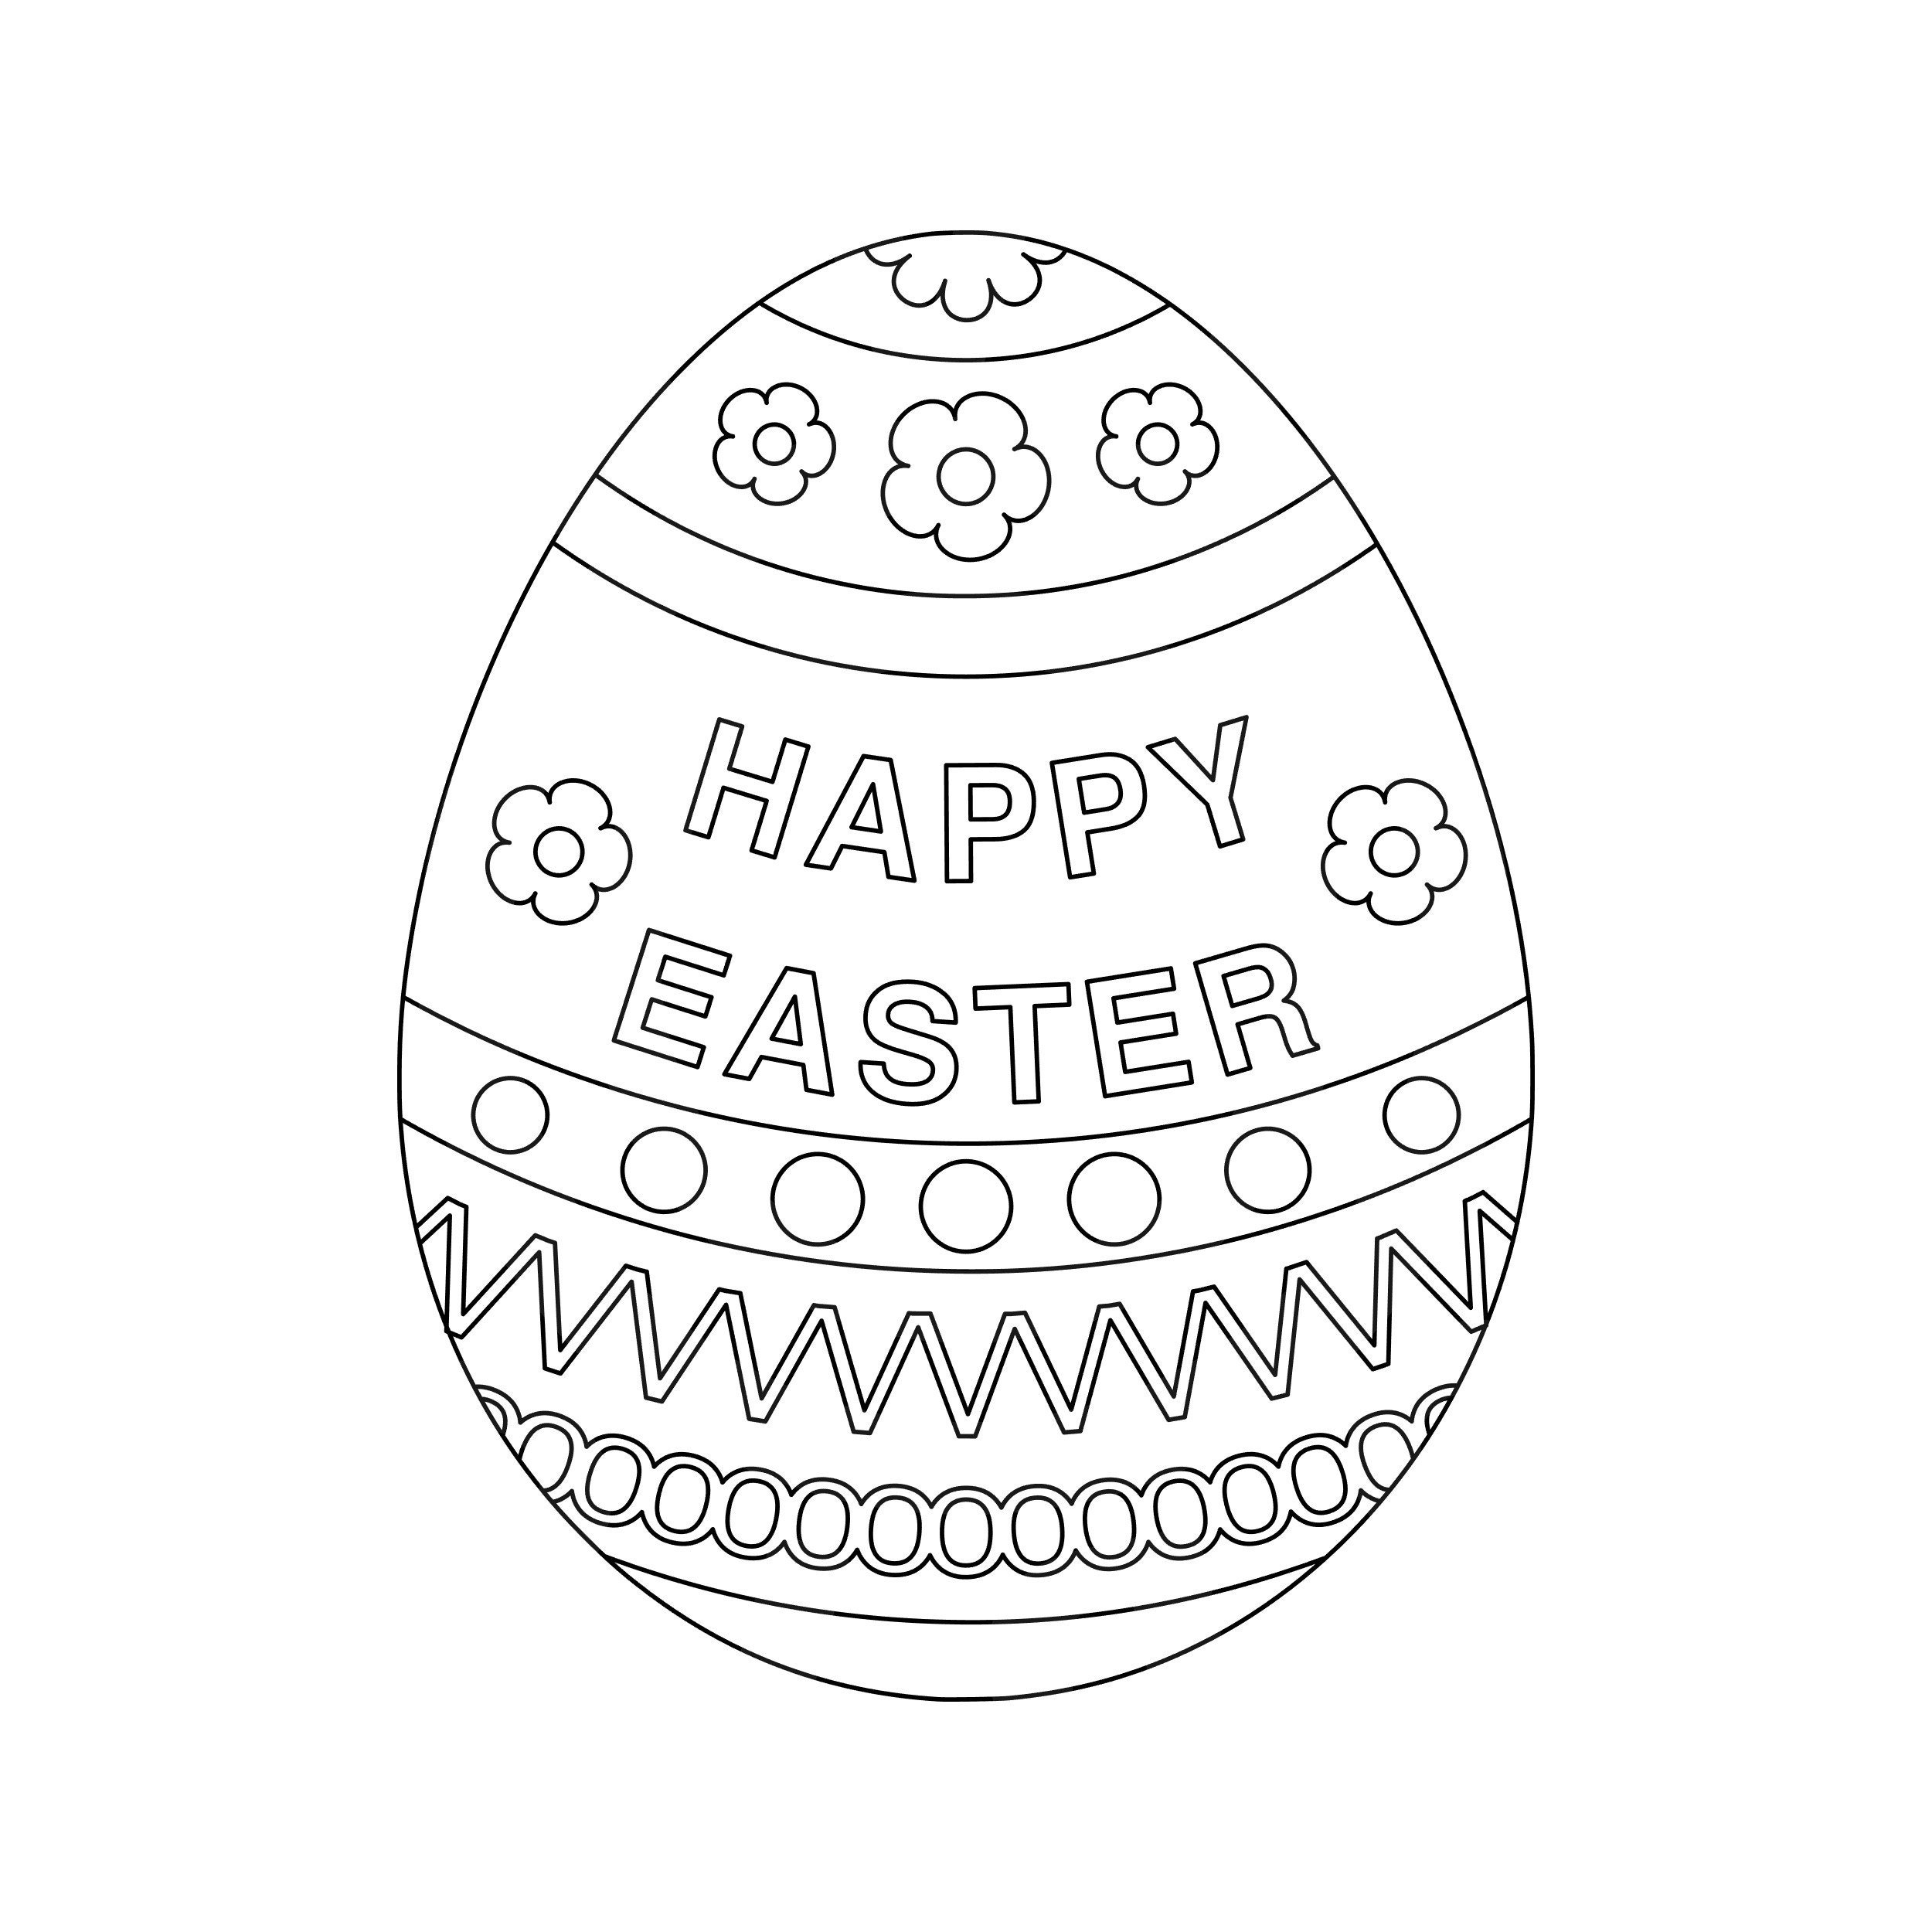 Easter egg Coloring Page, Easter egg Colouring In Page,Easter Egg Svg,  Printable, Silhouette Cut Files, Cricut Cut Files, Svg Files